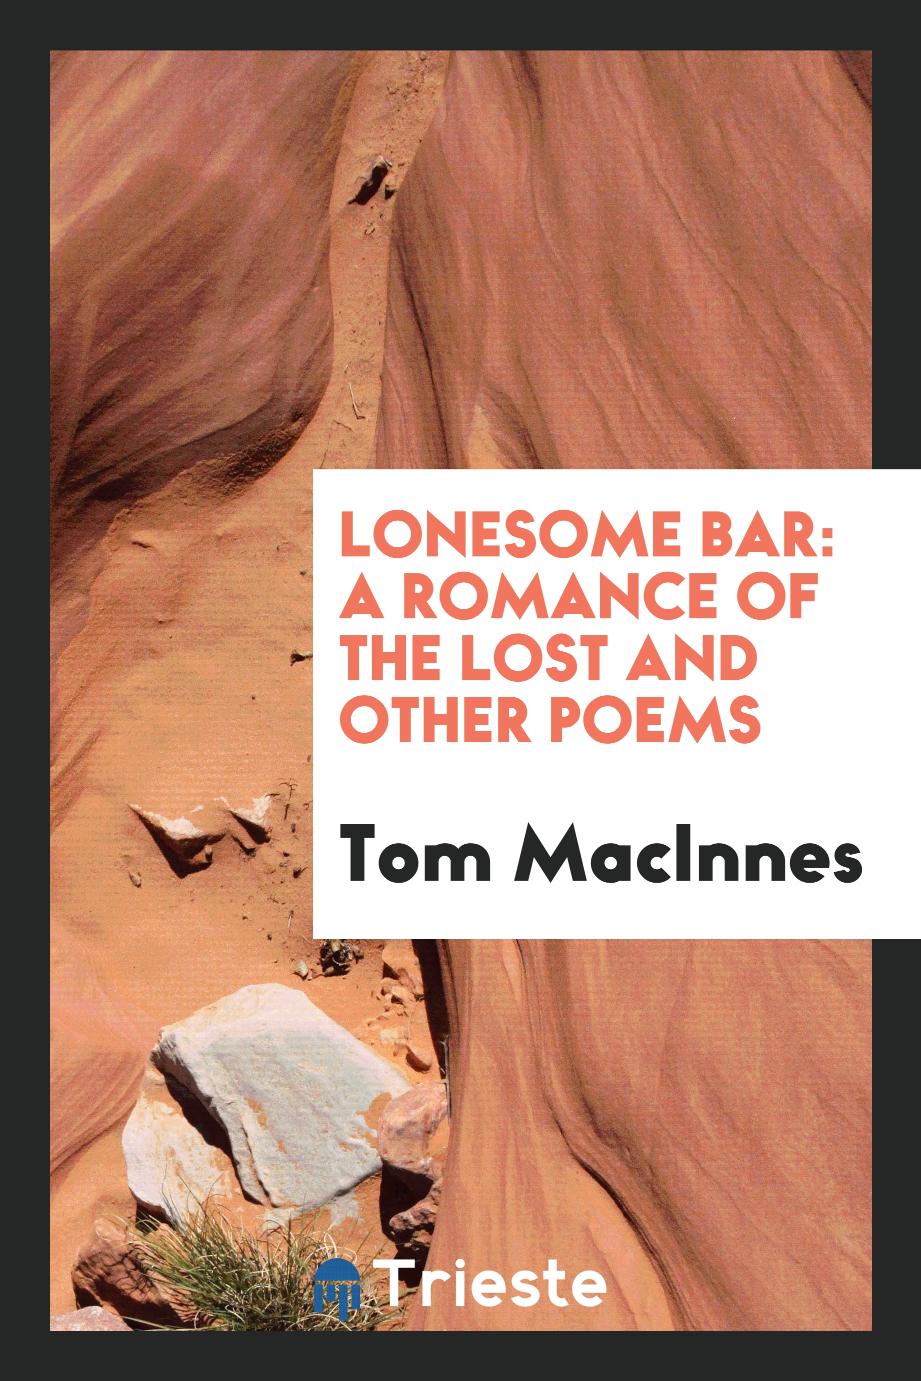 Lonesome bar: a romance of the lost and other poems